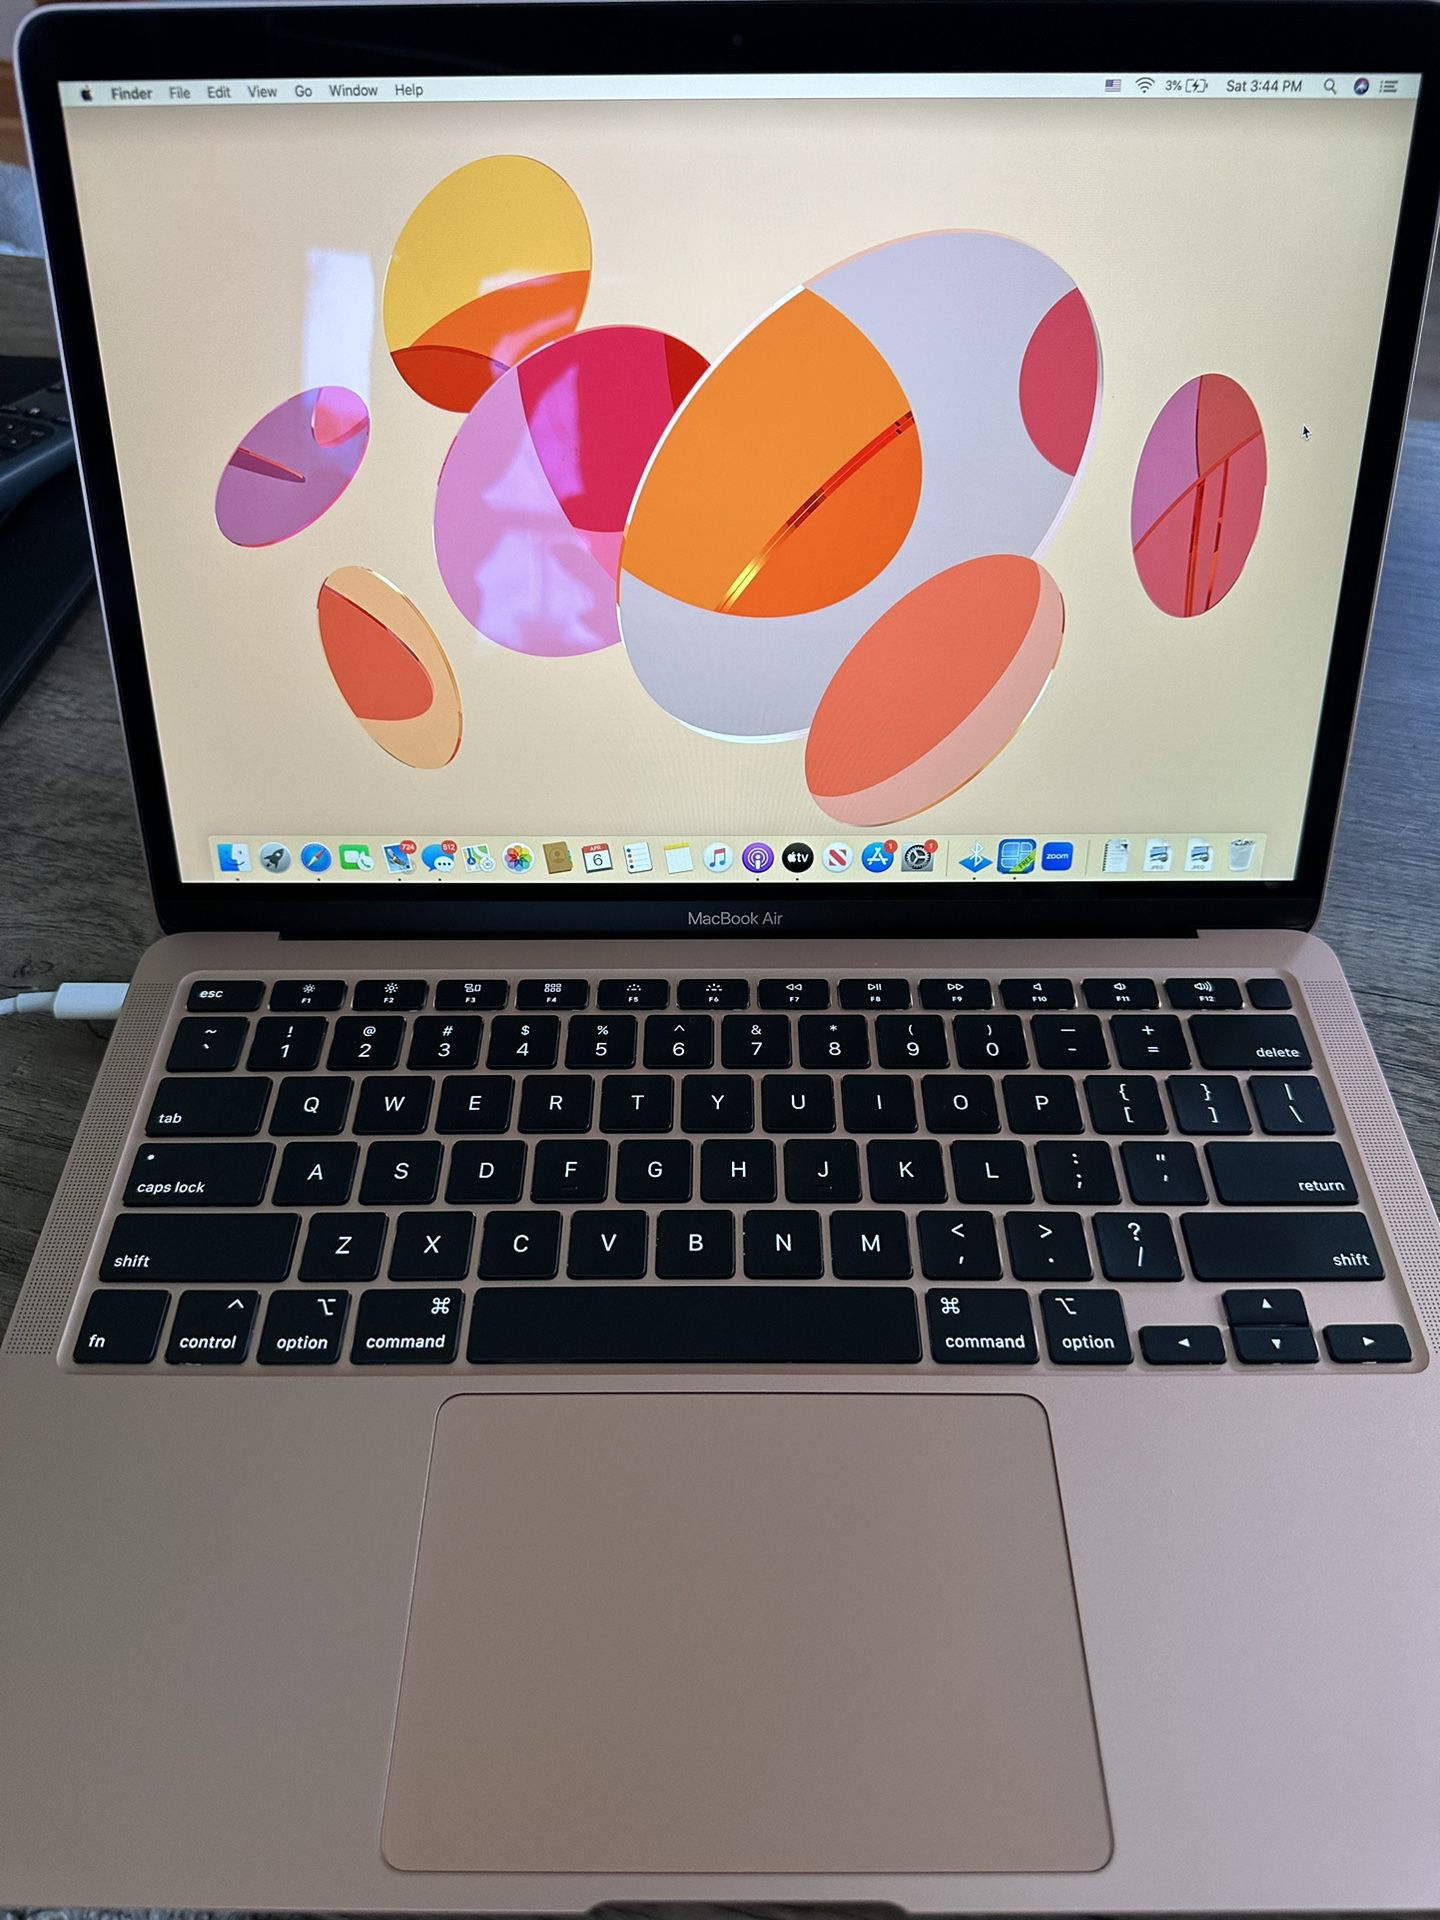 Apple - MacBook Air 13.3" Laptop with Touch ID - Intel Core i3 - 8GB Memory - 256GB Solid State Drive - Rose Gold